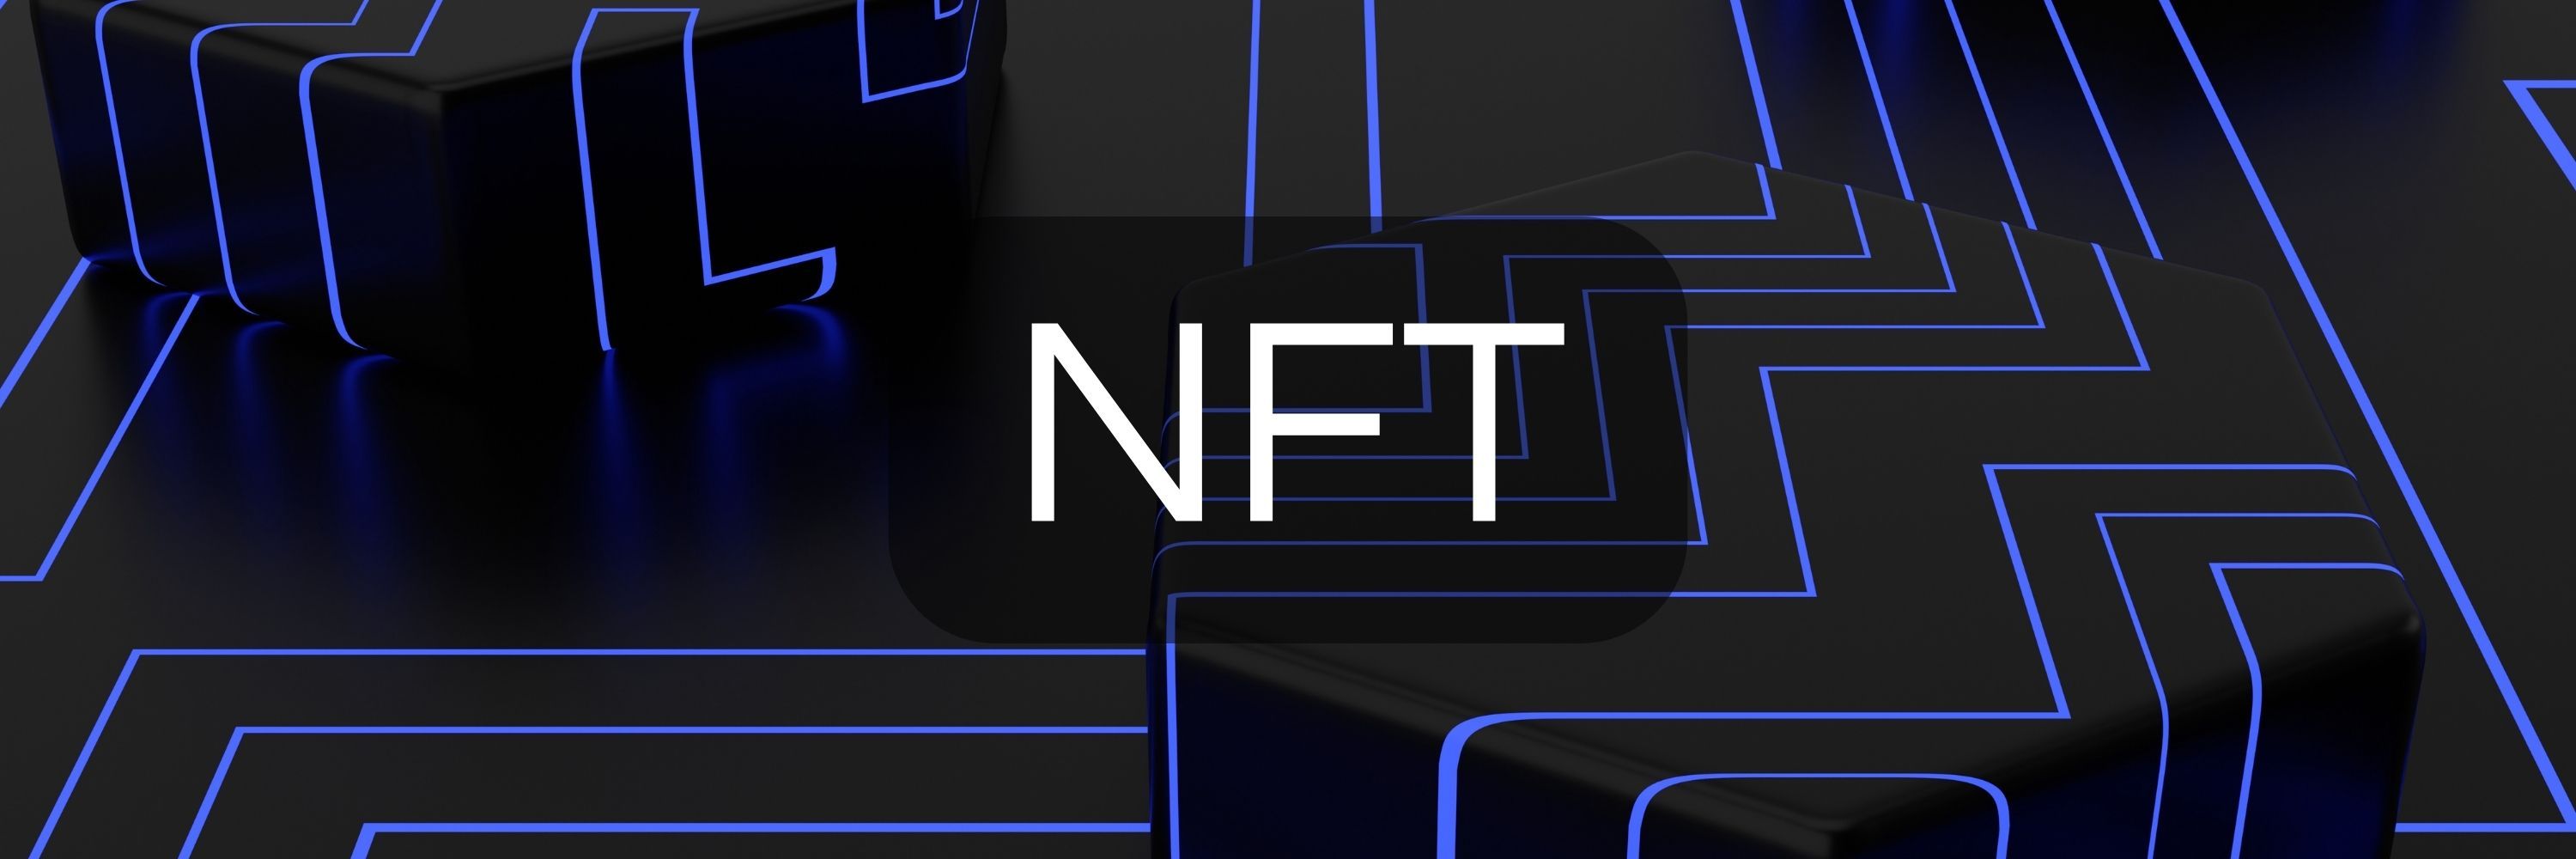 The NFT industry challenges